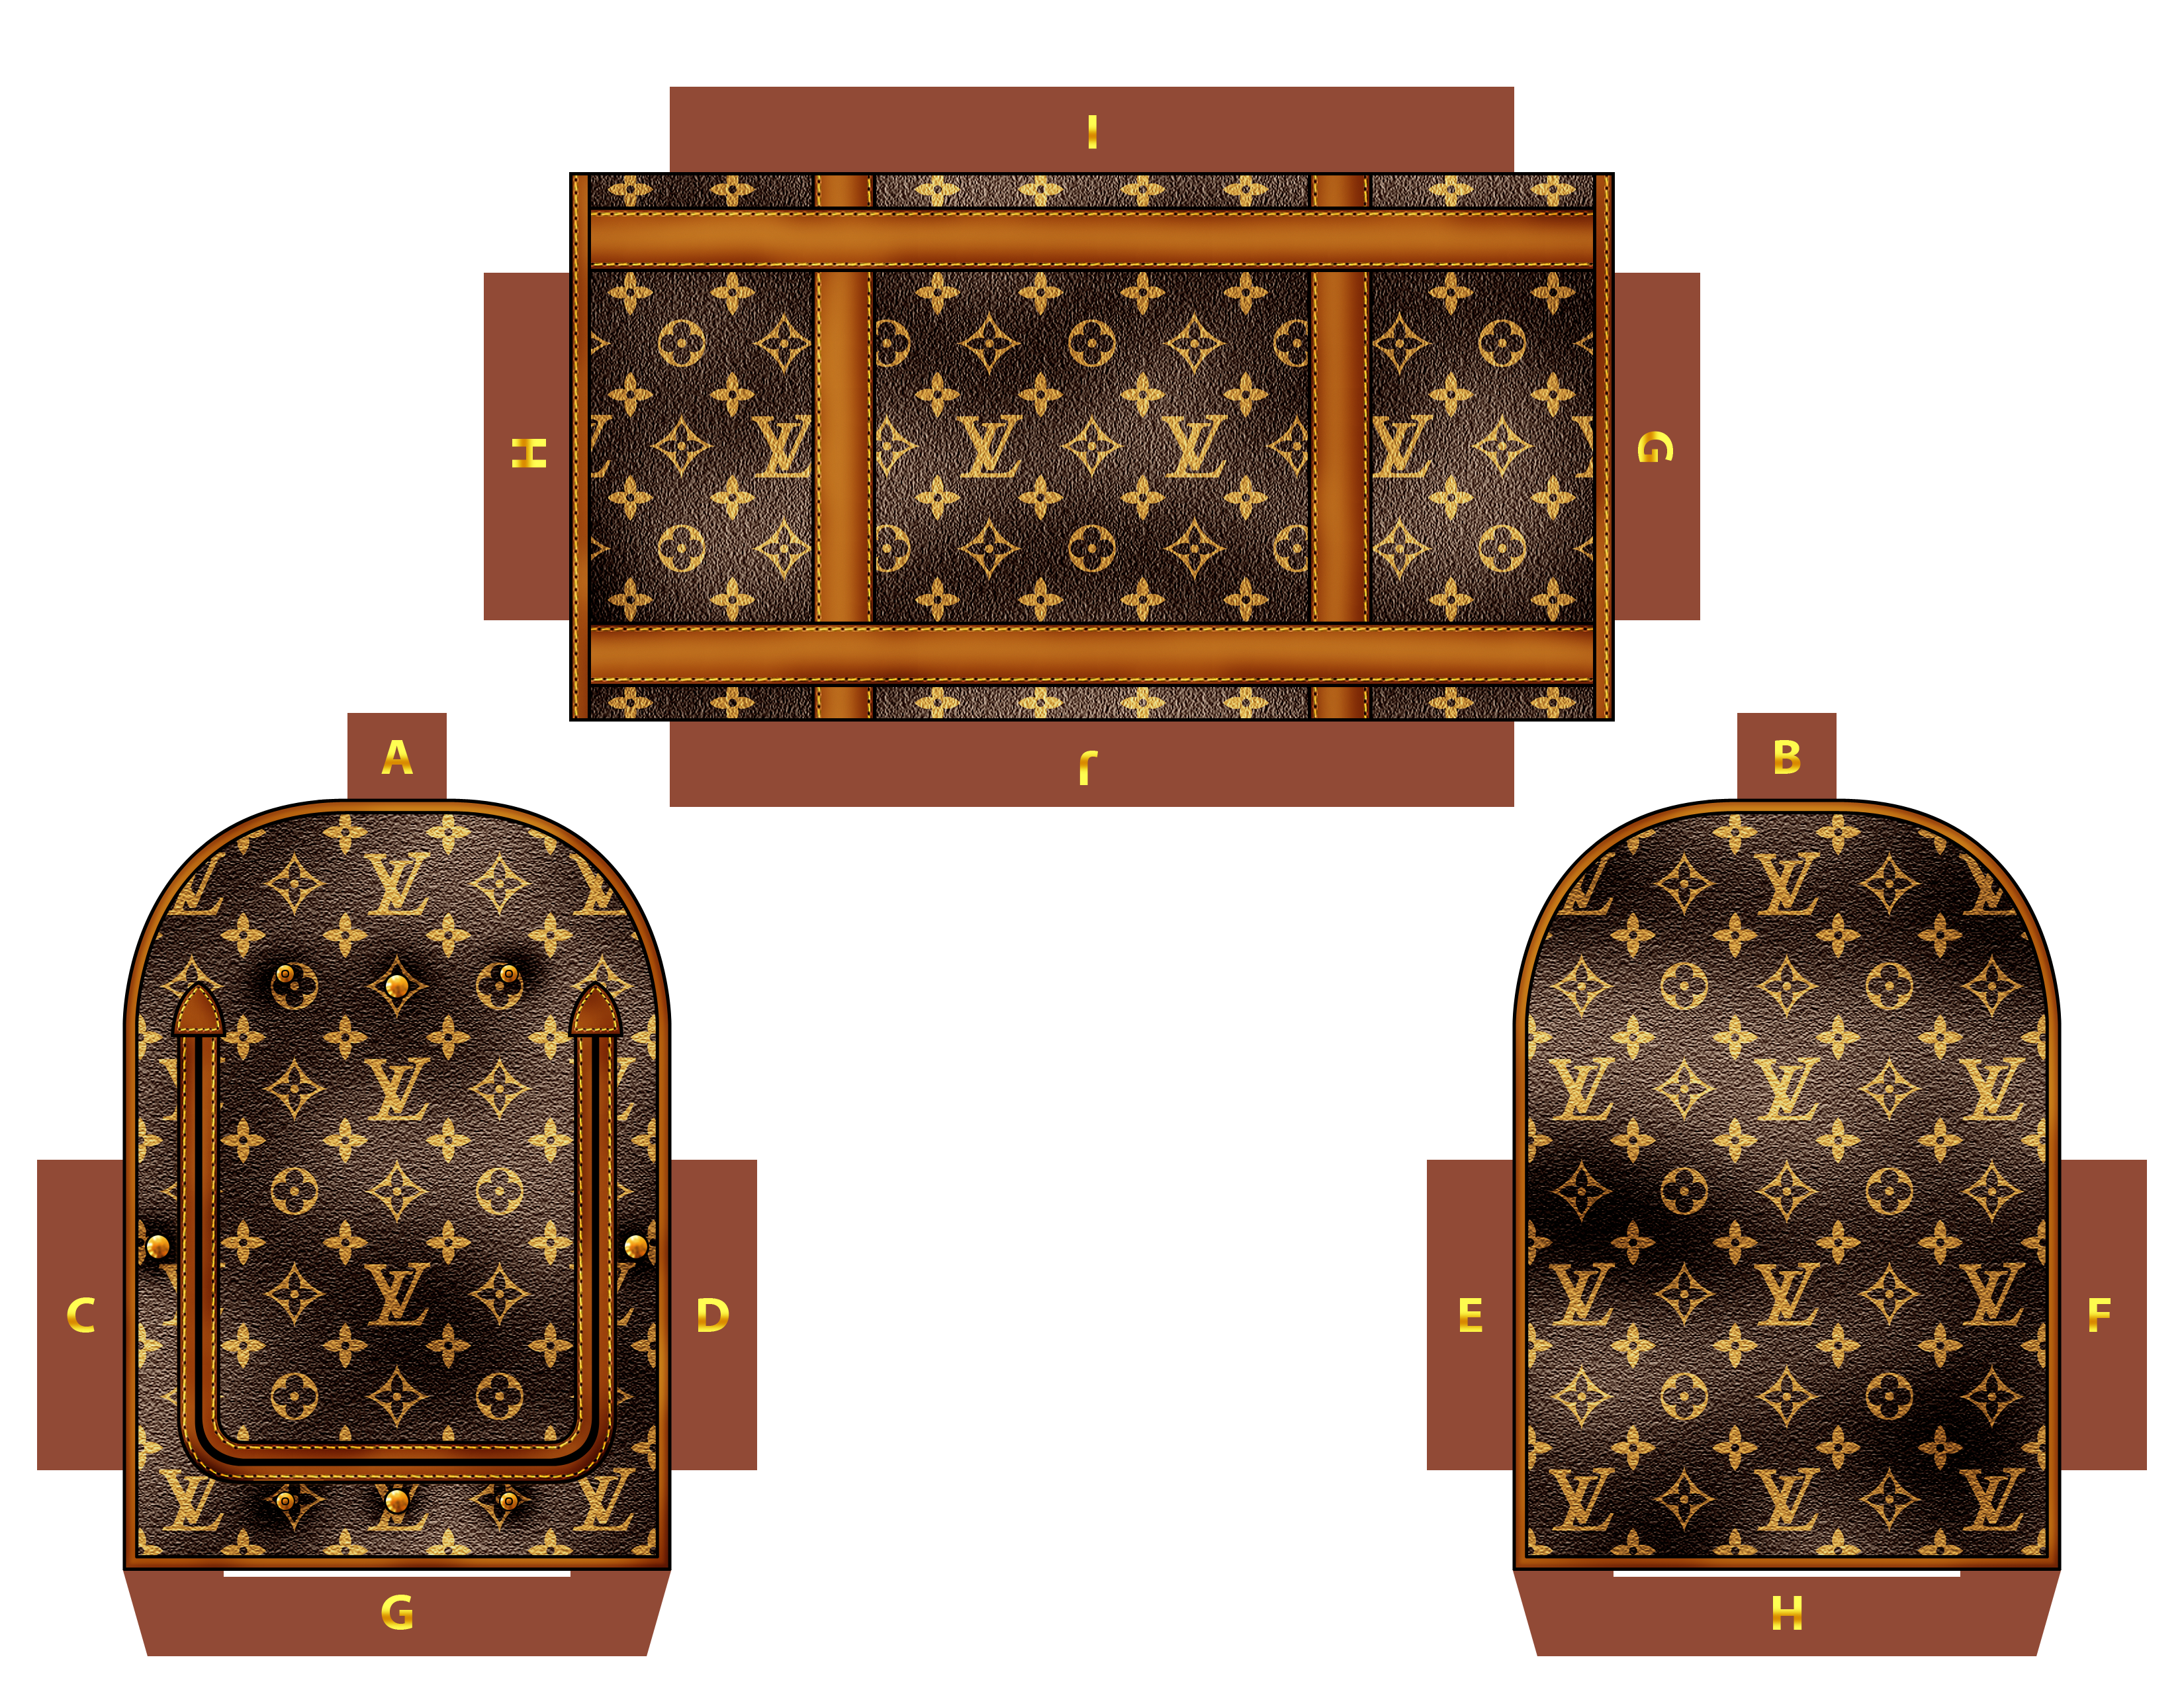 Louis Vuitton Free Printable Papers.